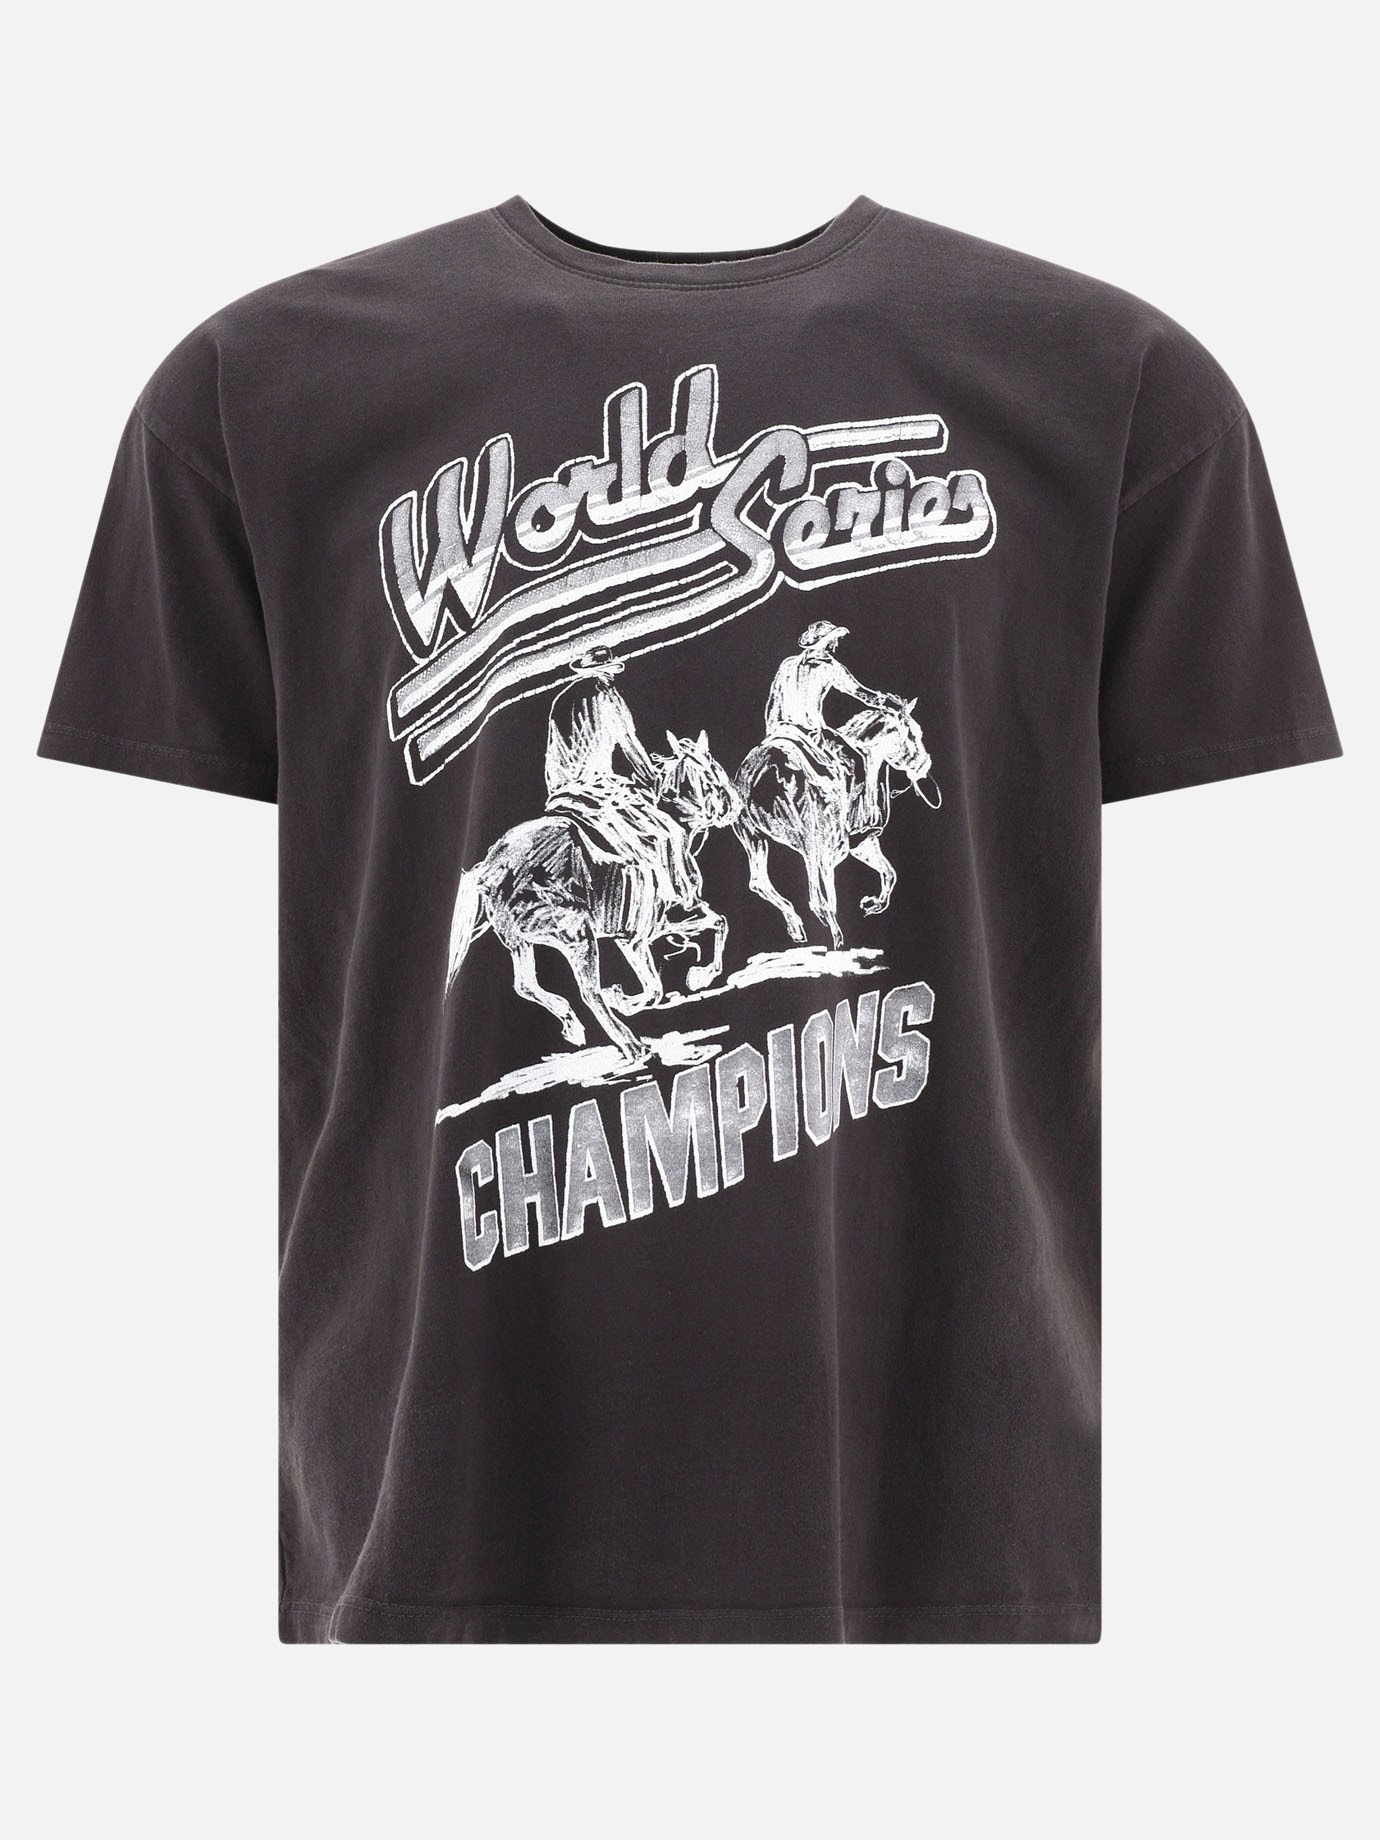  Worls Series Champions  t-shirtby One Of These Days - 0